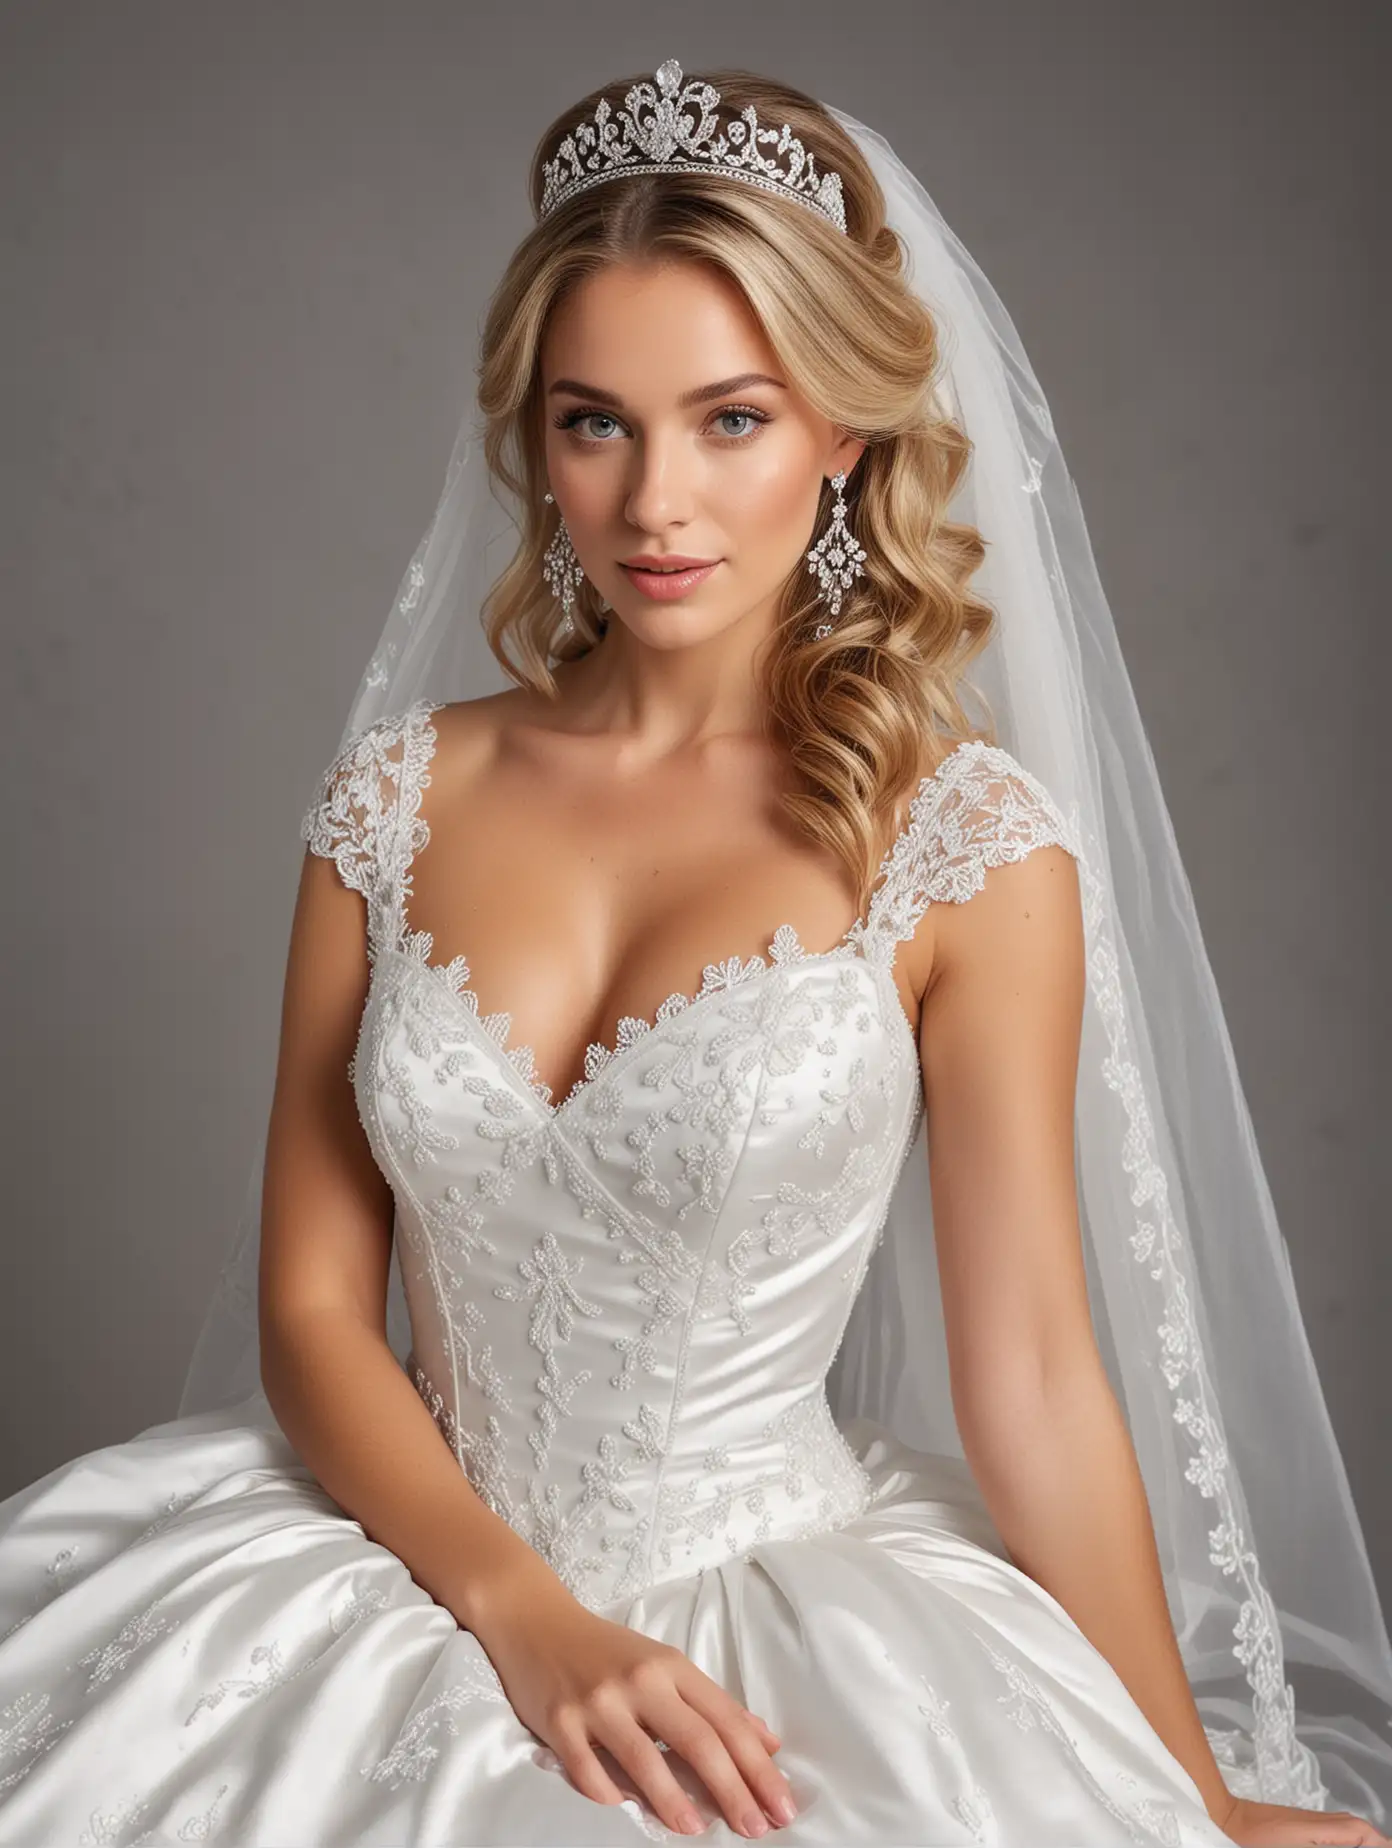 A beautiful bride in an elegant wedding dress with veil, wearing diamond earrings and a headband on her hair, posing for the camera. The white satin ball gown features lace accents along its bodice and waistline, while the full skirt cascades down to the floor. She has long blonde straightened hair adorned by a delicate tiara that adds depth to her face. Her pose is relaxed yet sophisticated as she poses against a soft grey background. Shot with Canon EOS R5 using a wideangle lens at f/2.8 aperture setting,facing the camera,model indoors